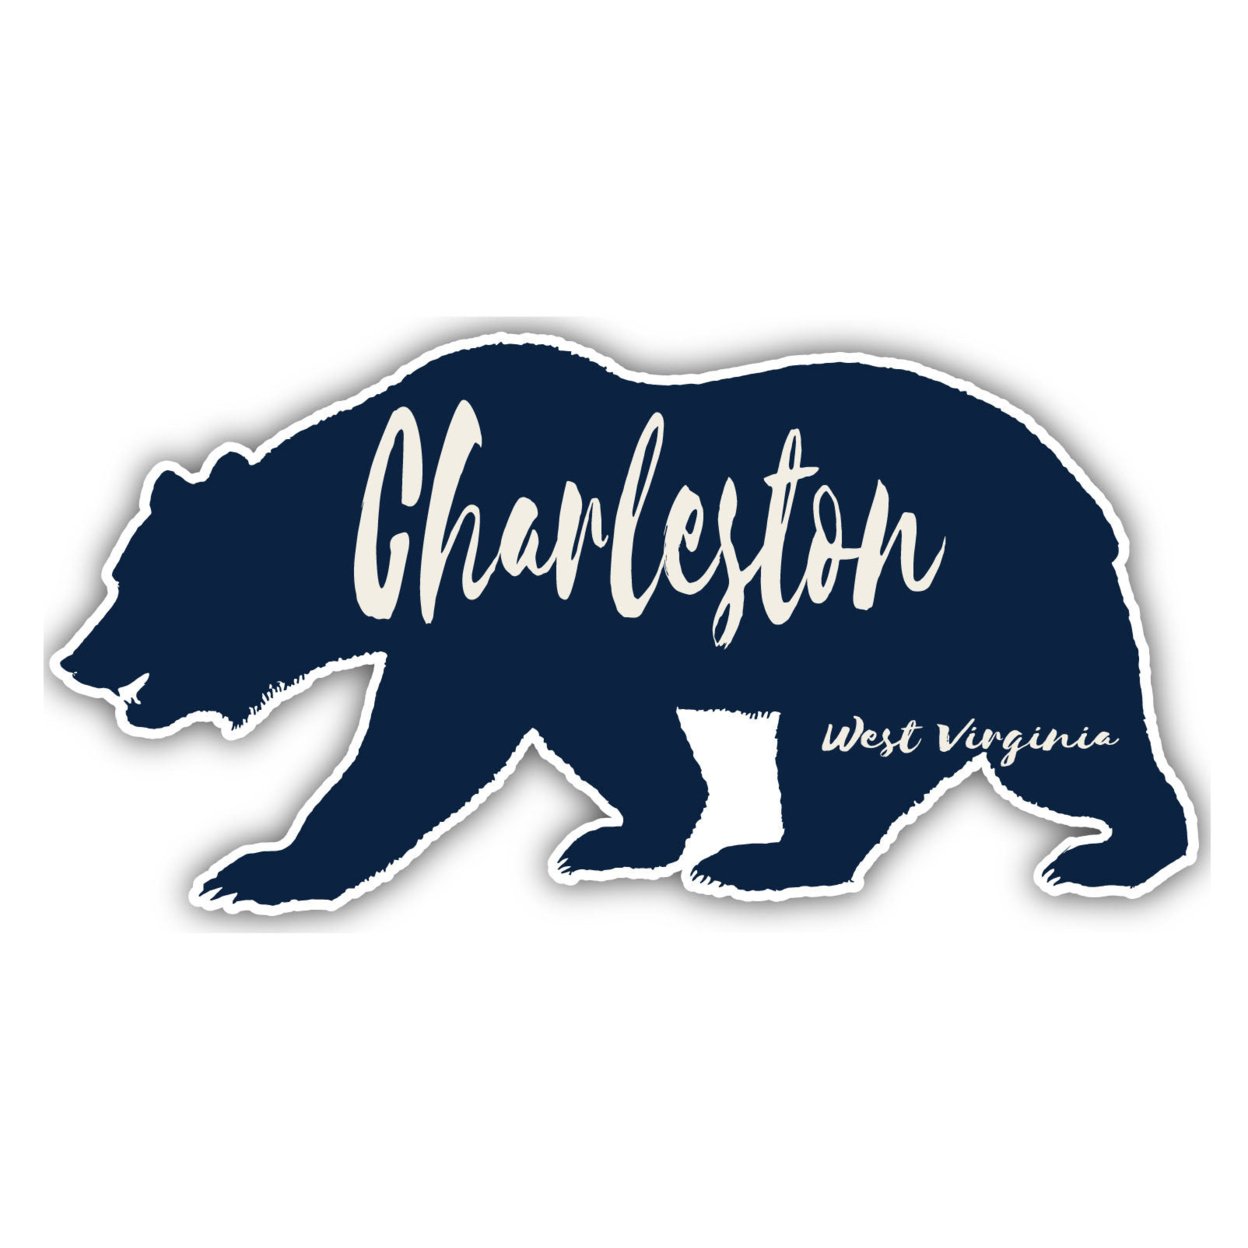 Charleston West Virginia Souvenir Decorative Stickers (Choose Theme And Size) - 4-Pack, 4-Inch, Tent